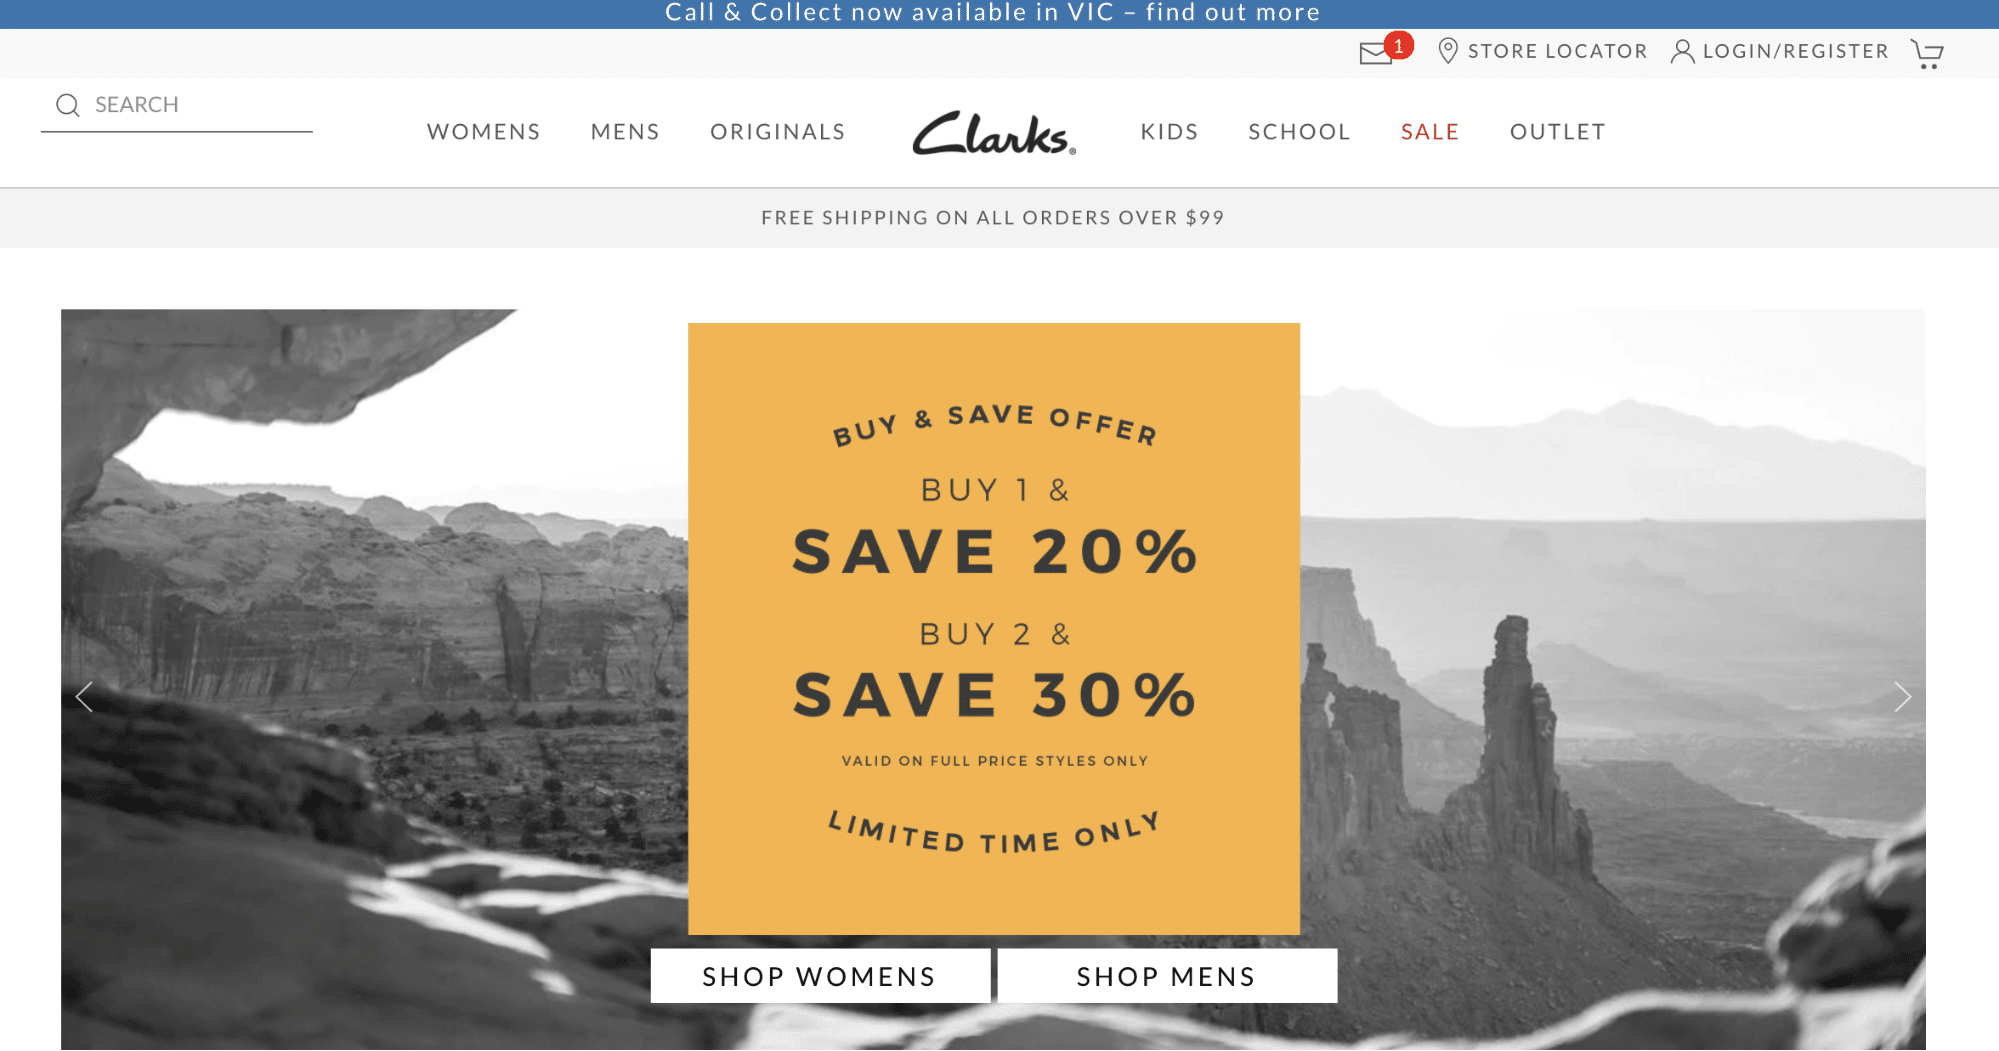 Clarks offers a brand-appropriate, friendly, and visually pleasing site from the moment you land on the homepage.